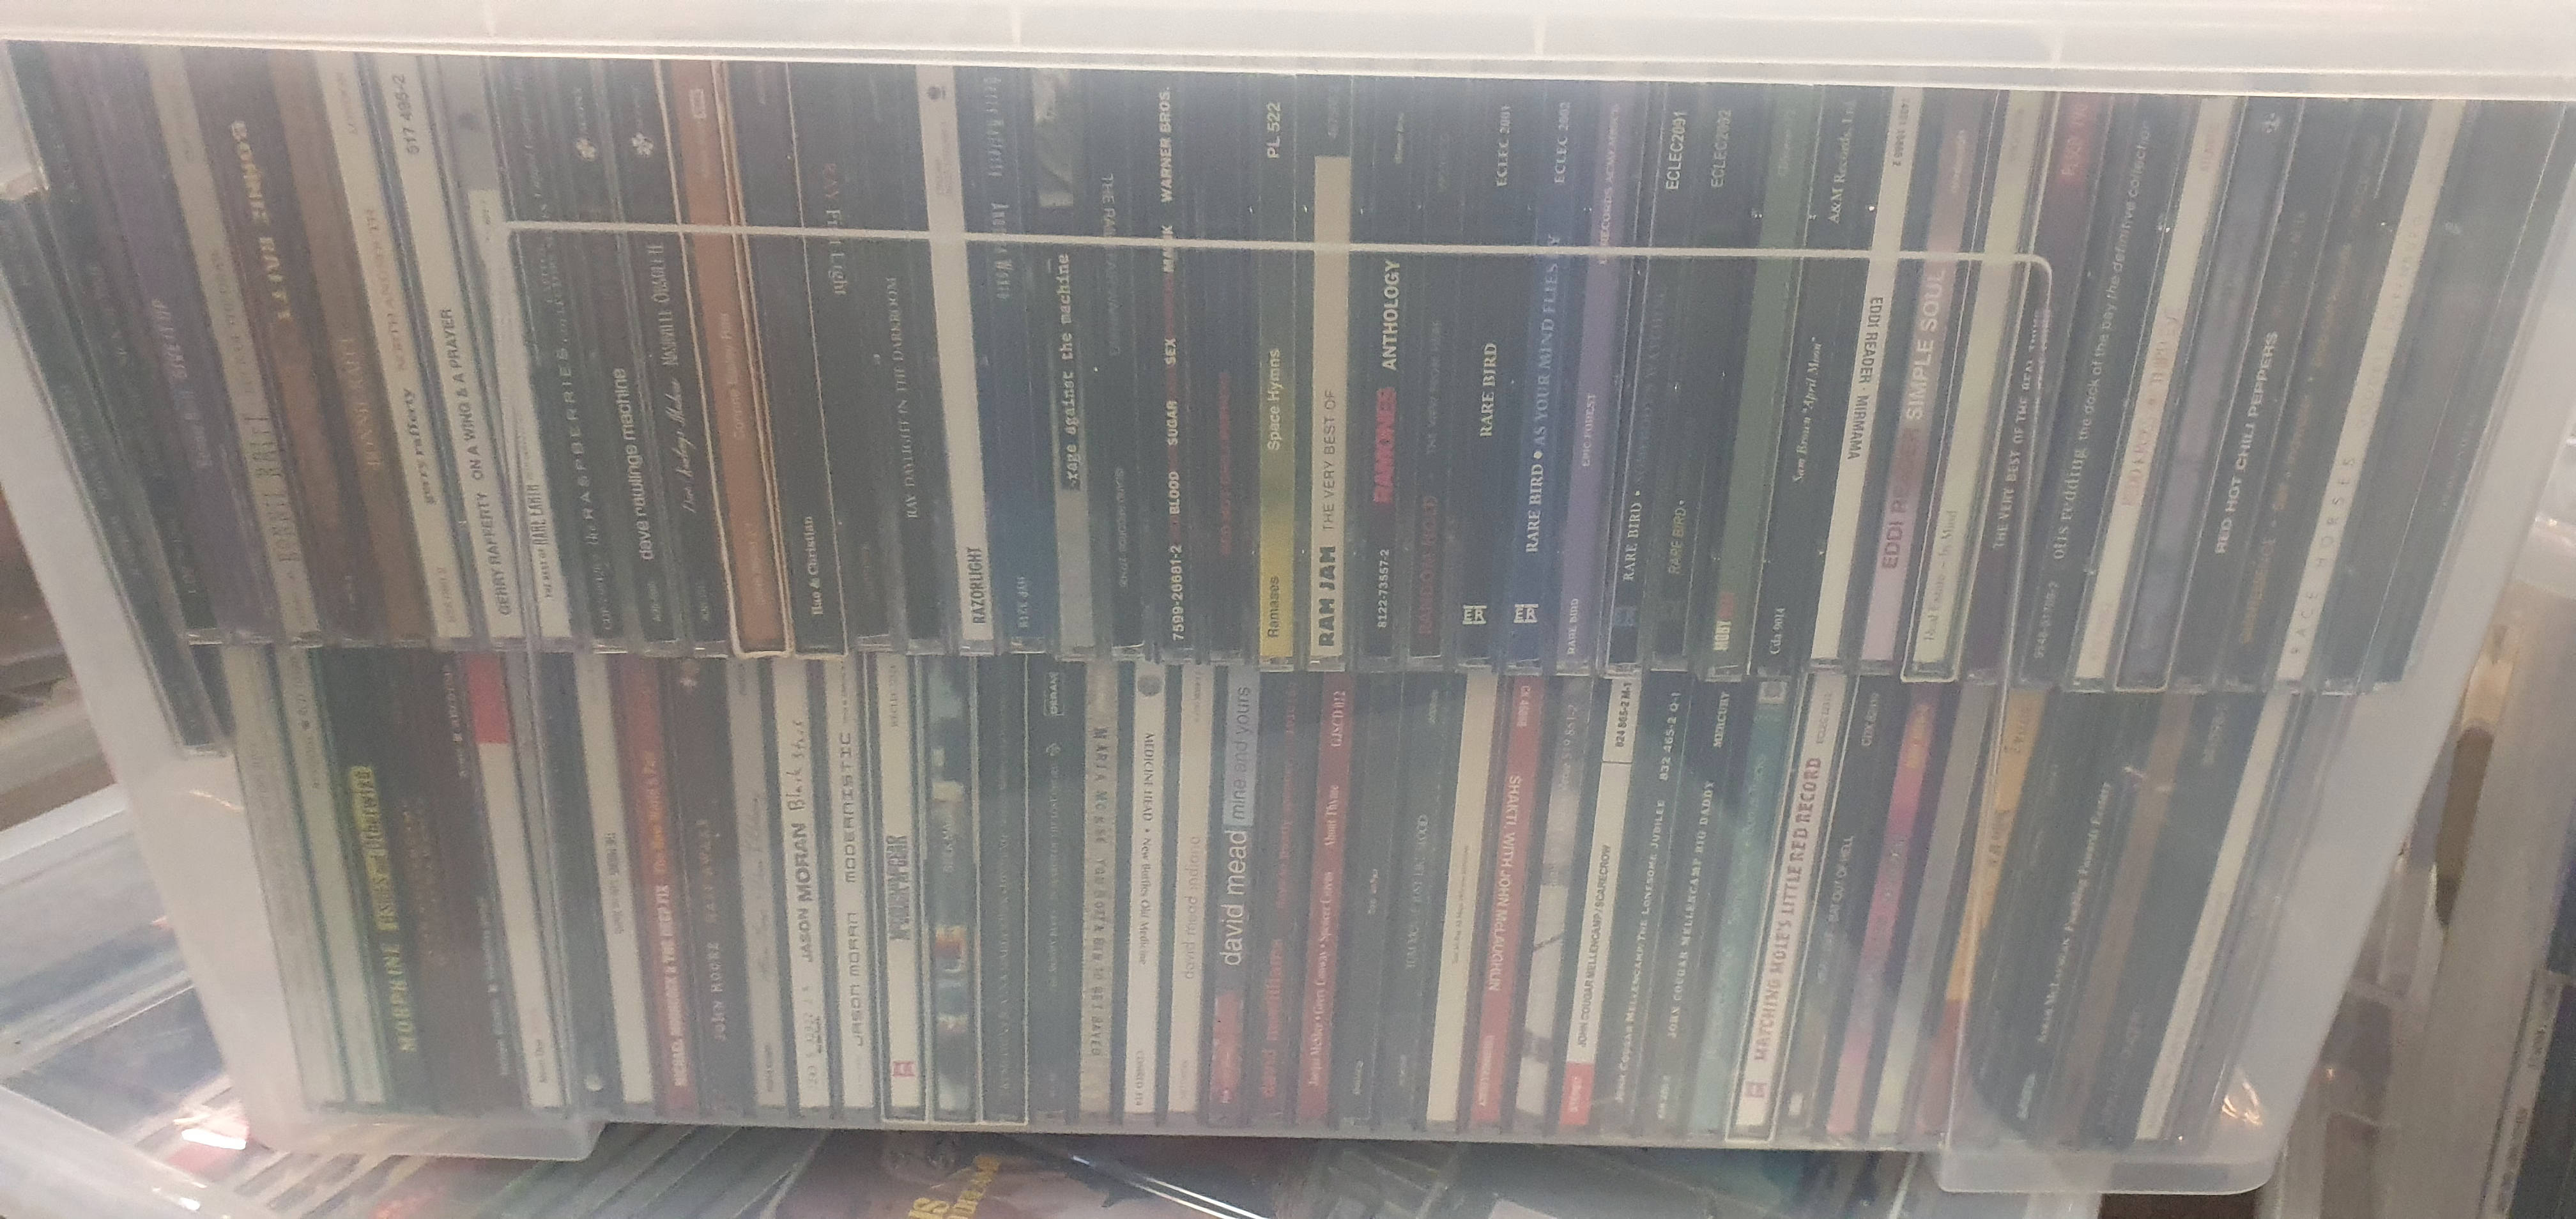 LARGE COLLECTION OF APPROX 200 MUSIC CD'S - Image 6 of 10